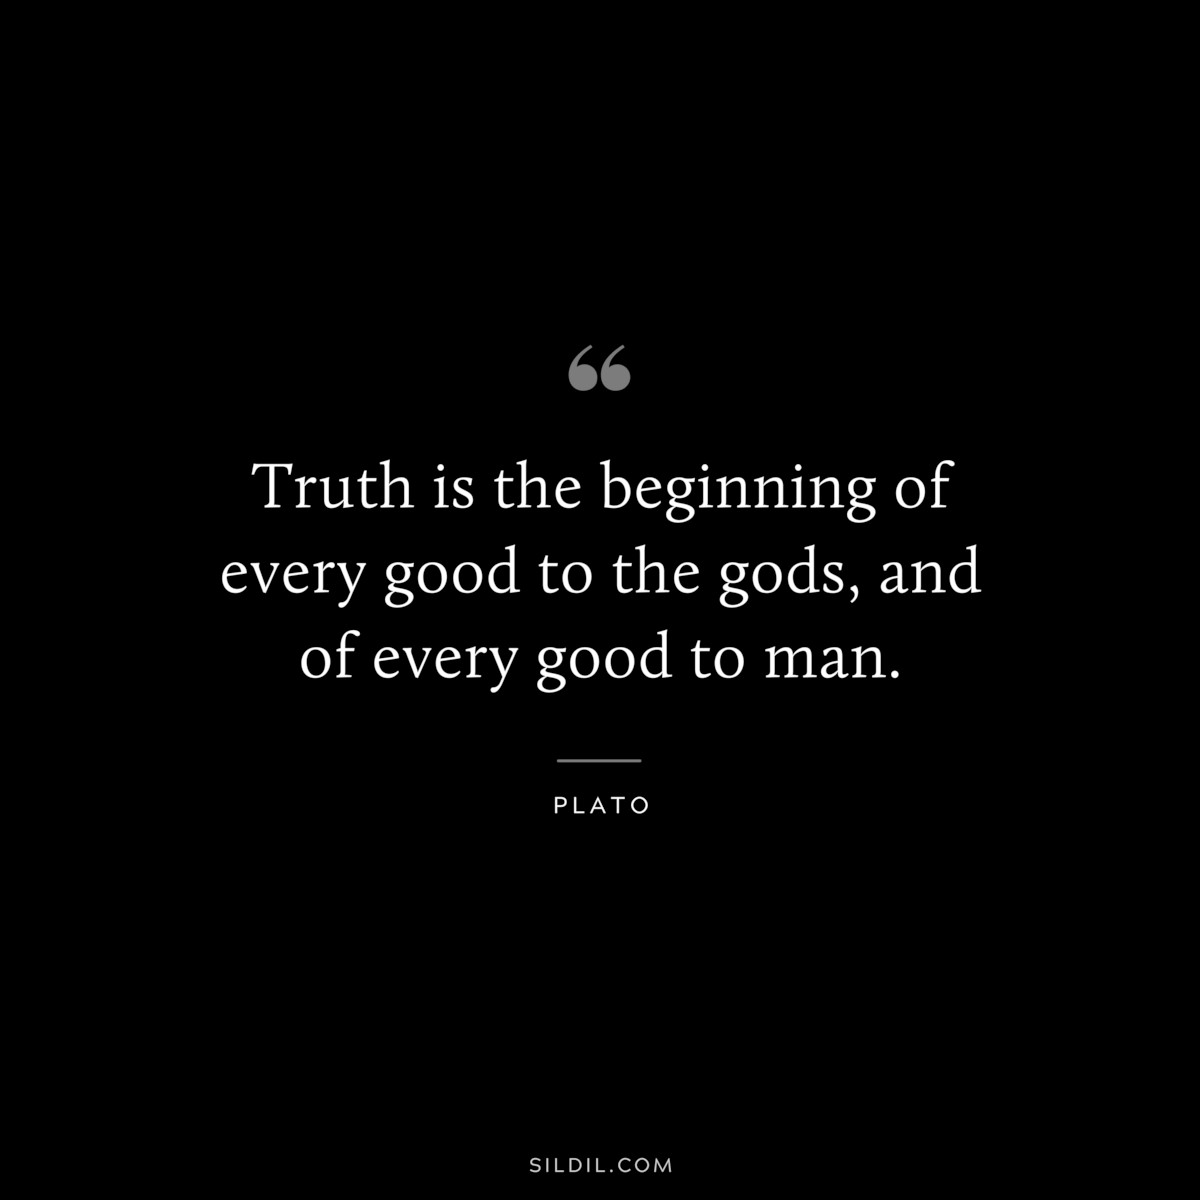 Truth is the beginning of every good to the gods, and of every good to man. ― Plato